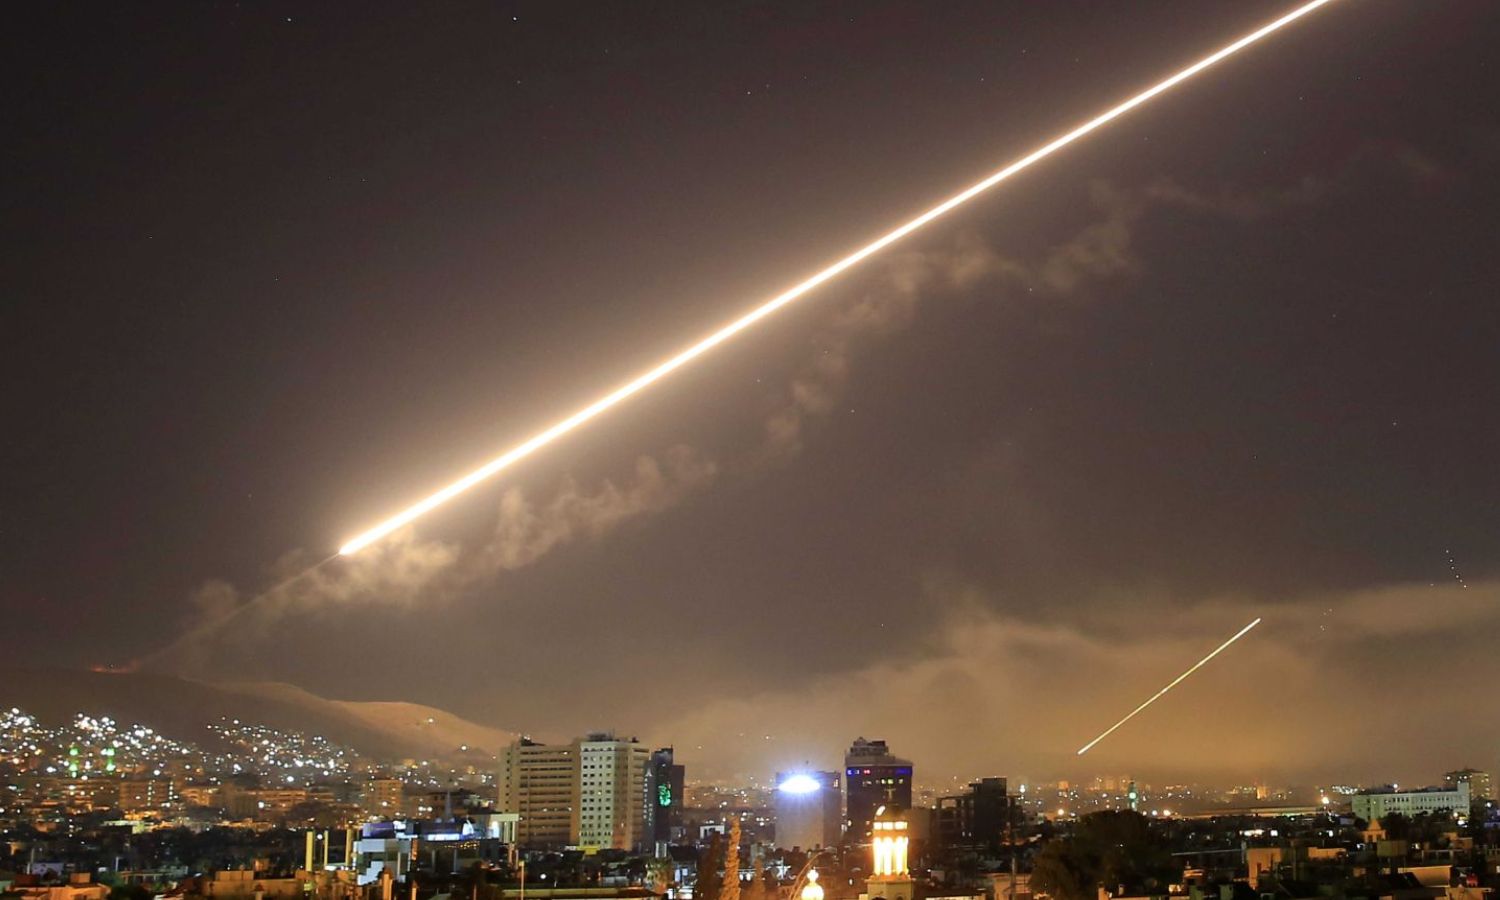 Syrian air defense systems intercepting Israeli air missiles in the sky of the capital, Damascus (AP Photo/Hassan Ammar)